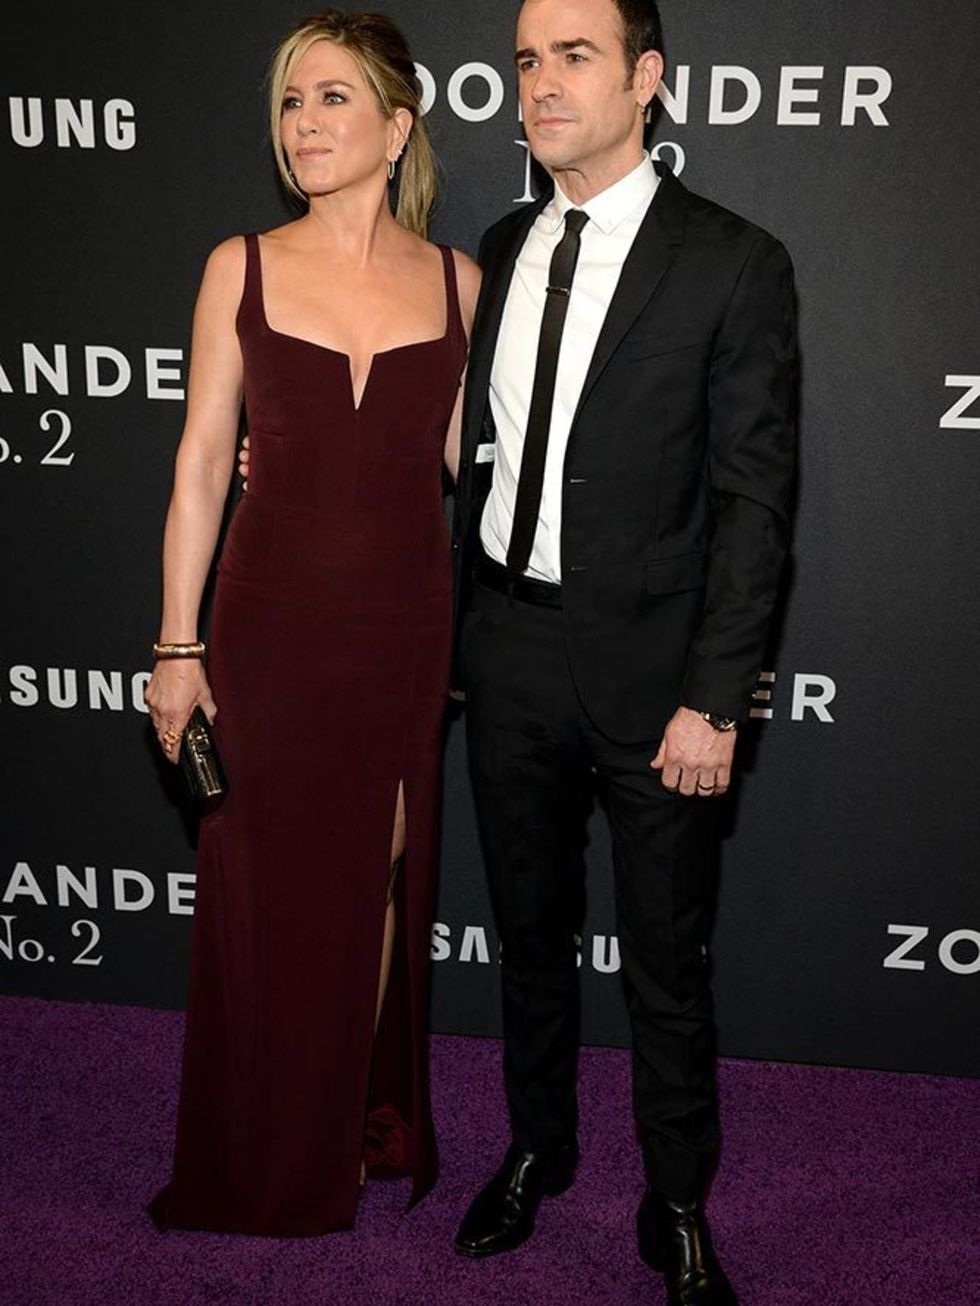 Jennifer Aniston and Justin Theroux at the Zoolander 2 premiere in New York, February 2016